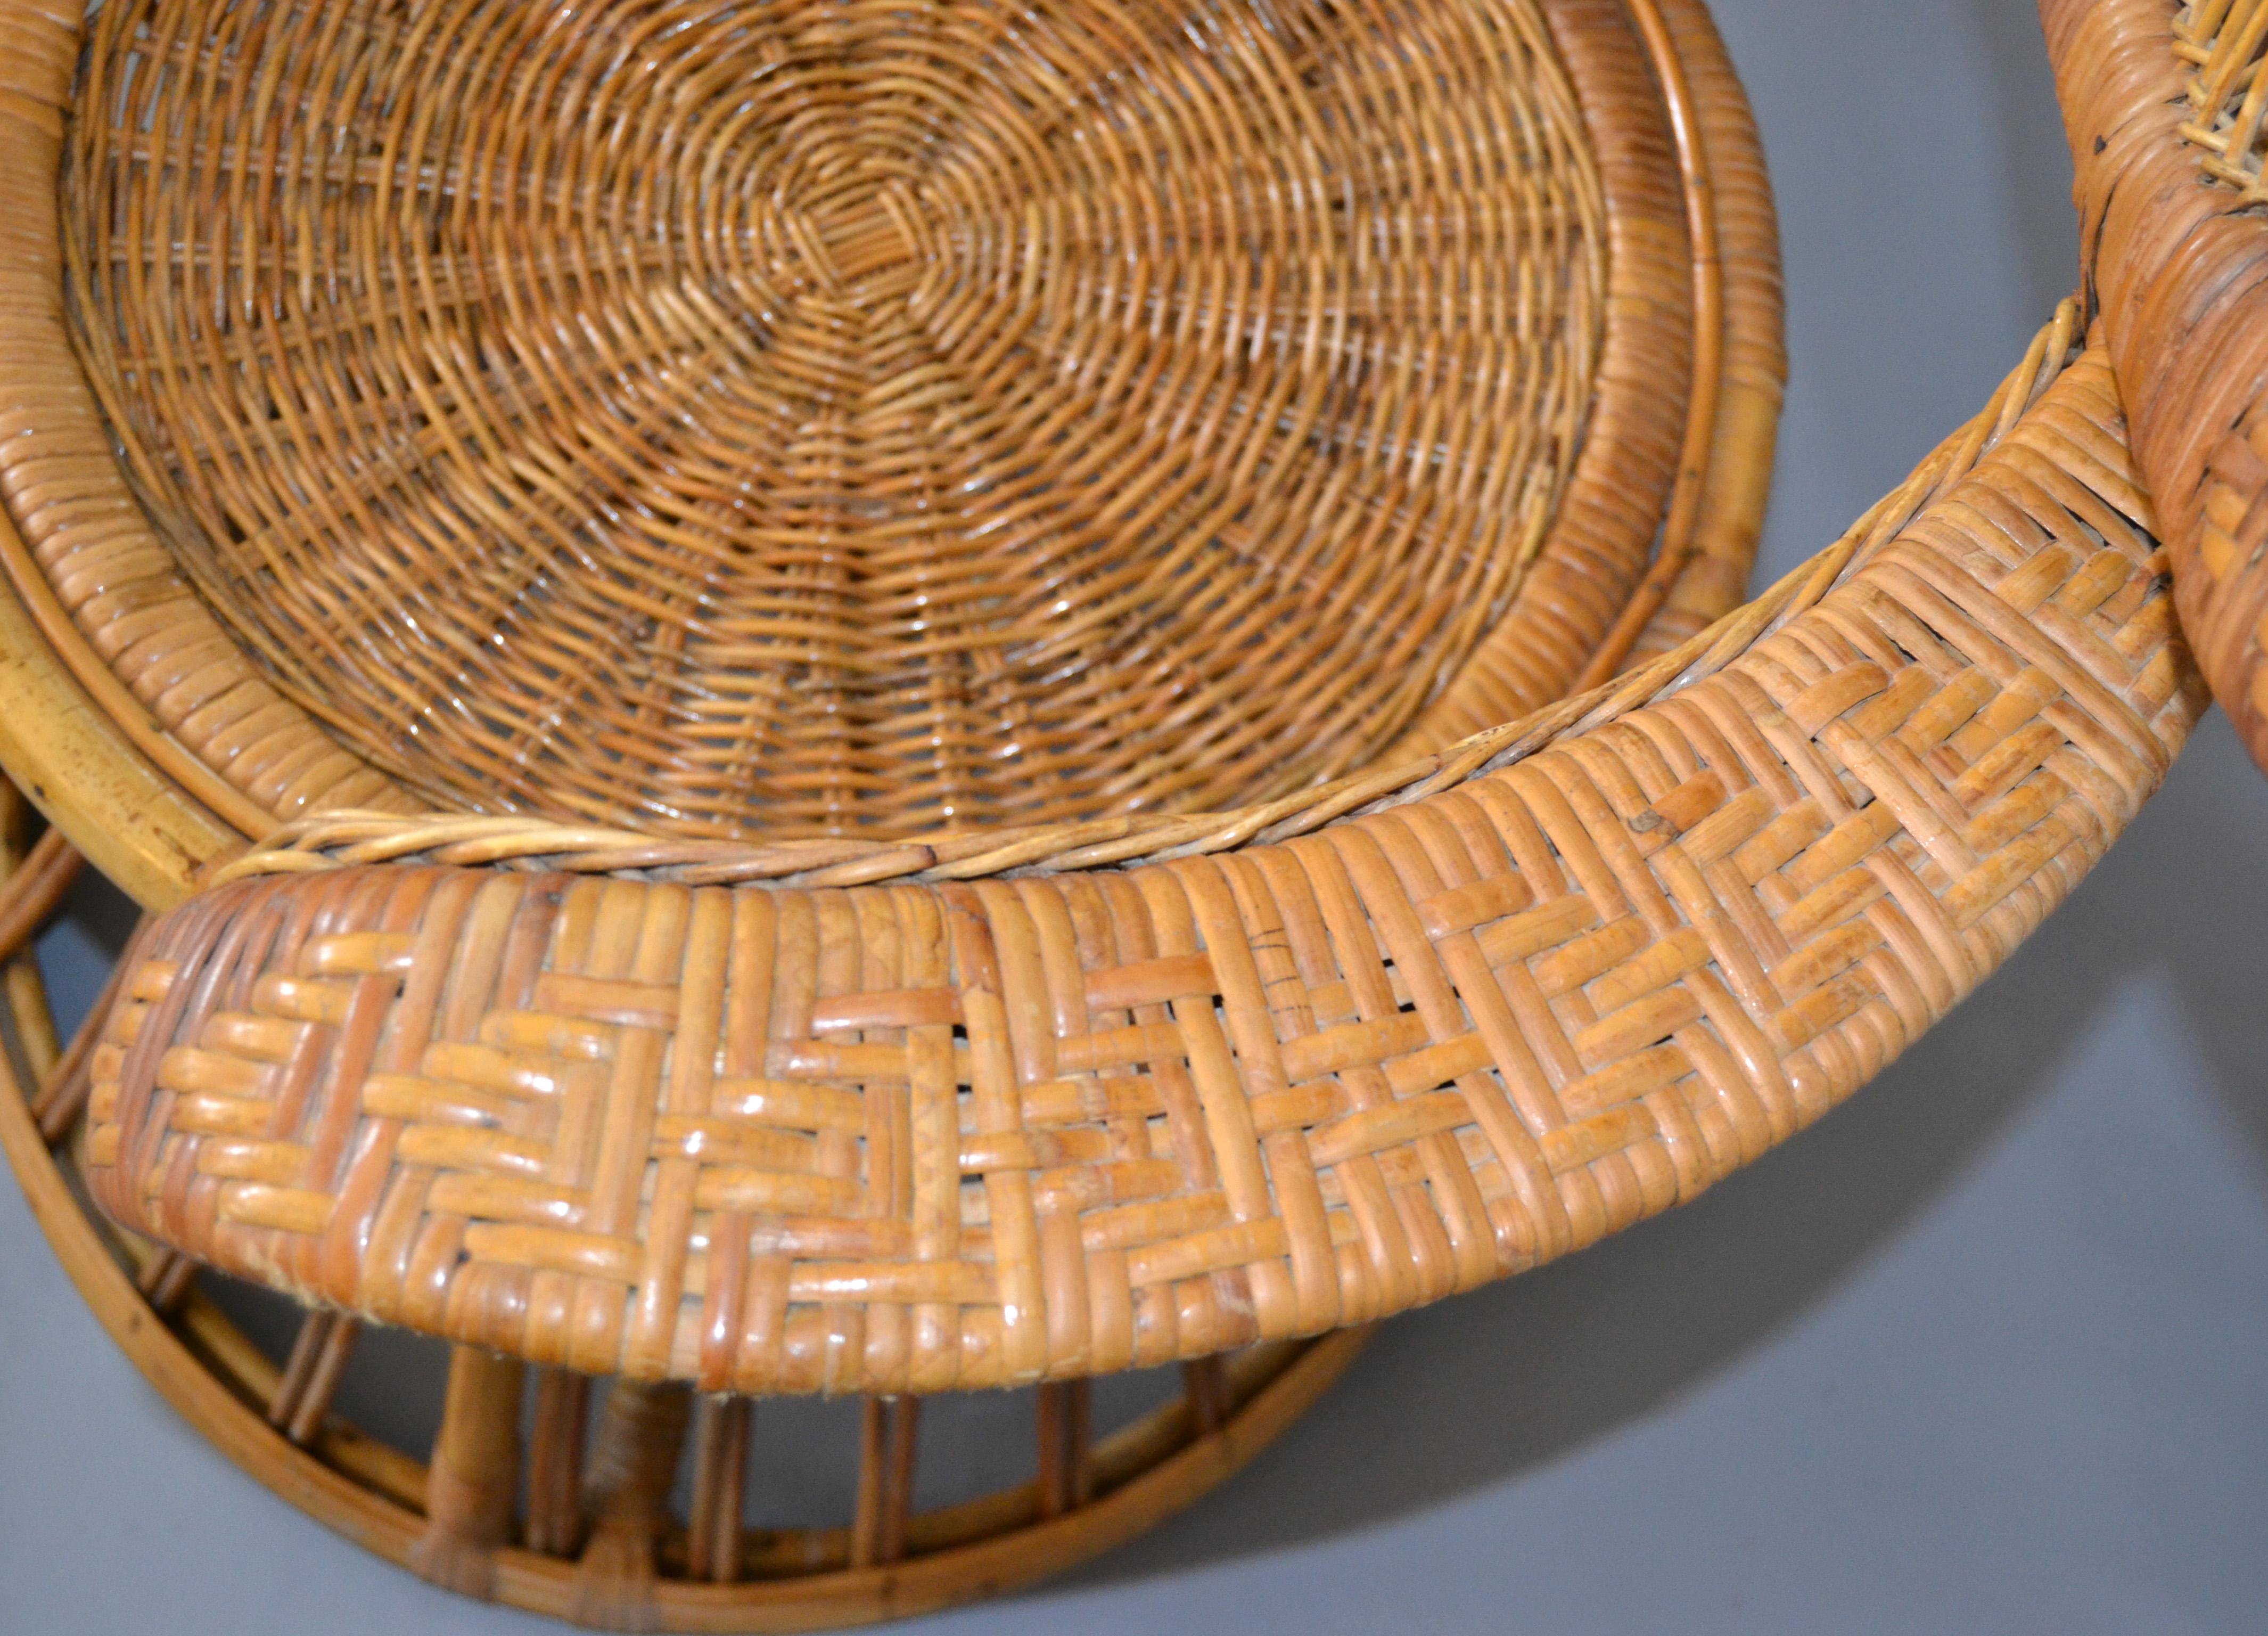 American Vintage Boho Chic Handcrafted Wicker, Rattan and Reed Peacock High Back Chair